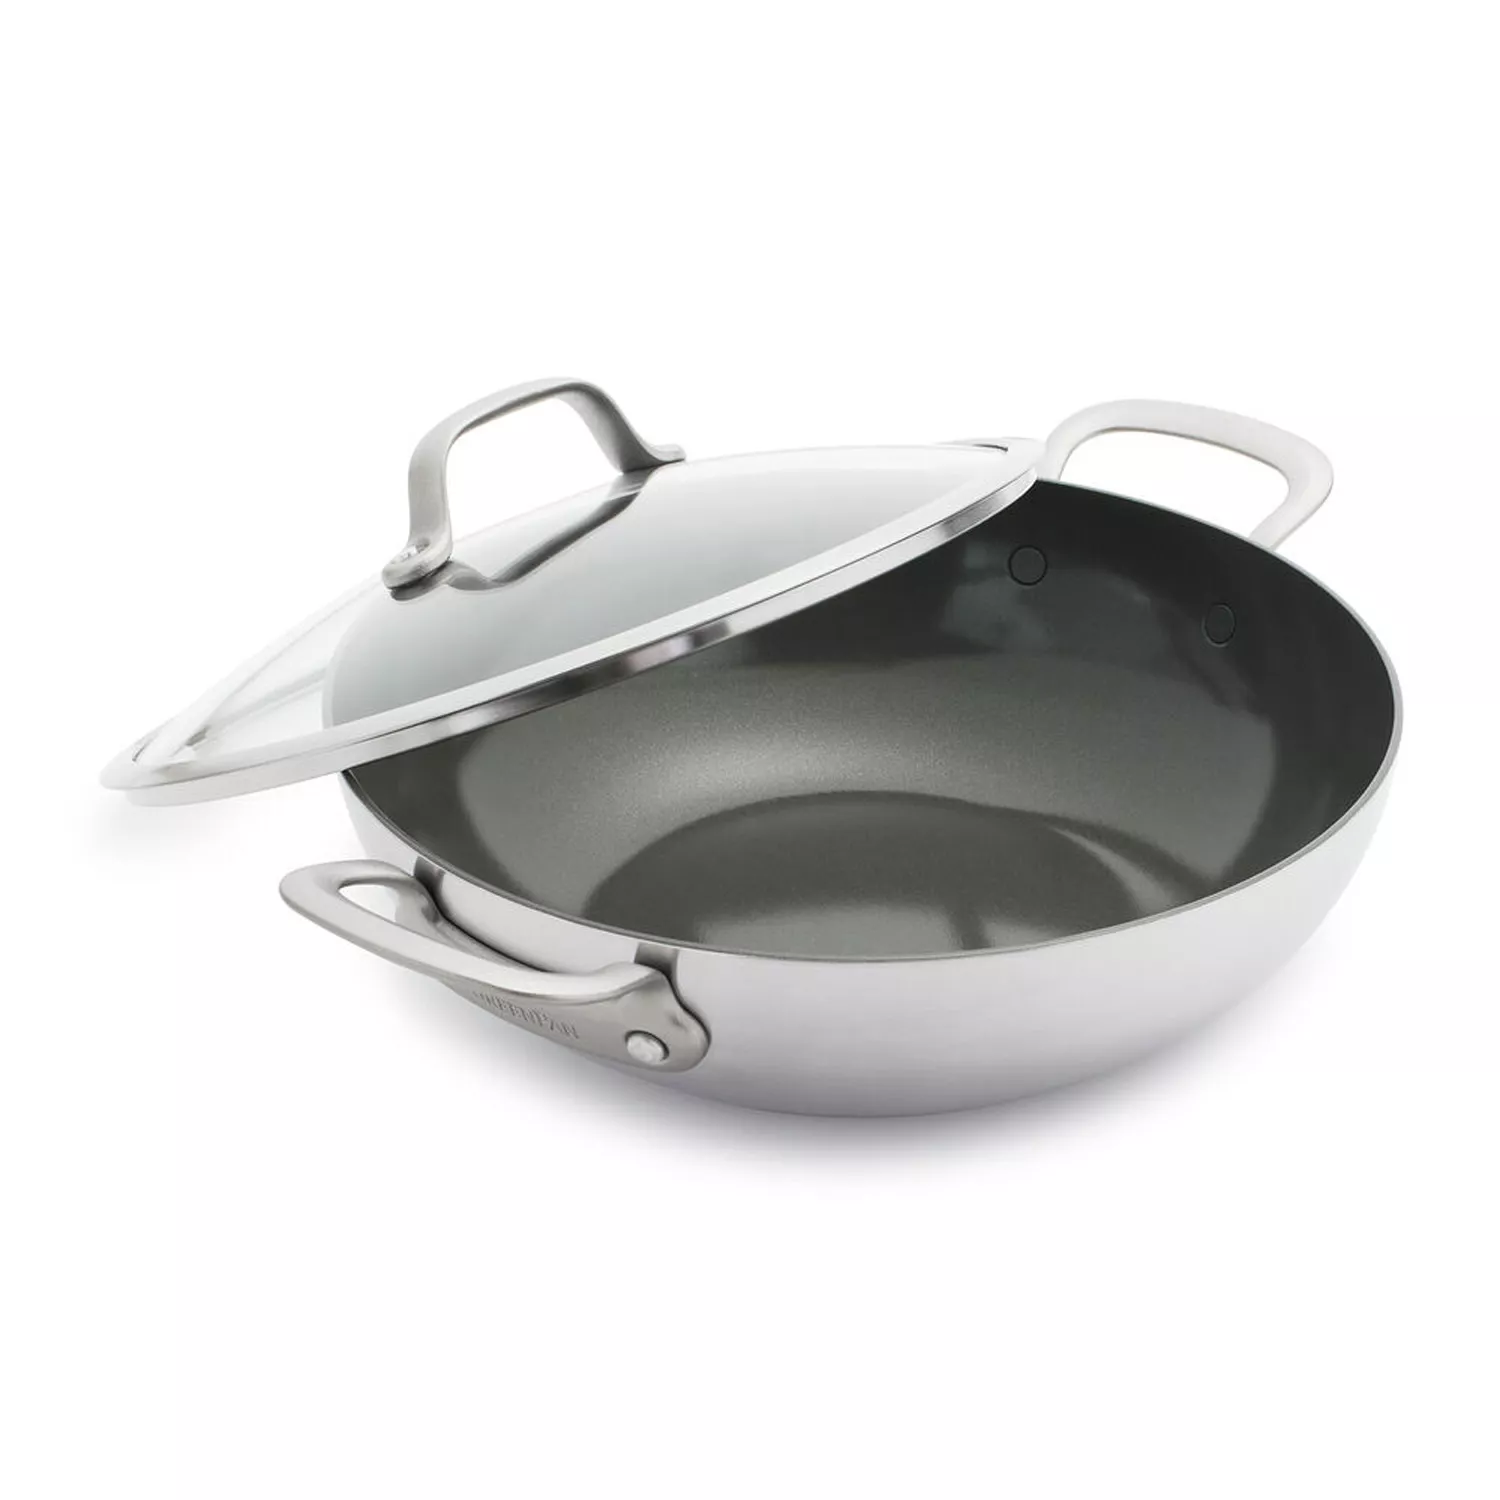 Rena Ware 1 1/2 Qt Ultra Ply Stainless Steel Sauce Pan/ Pot With